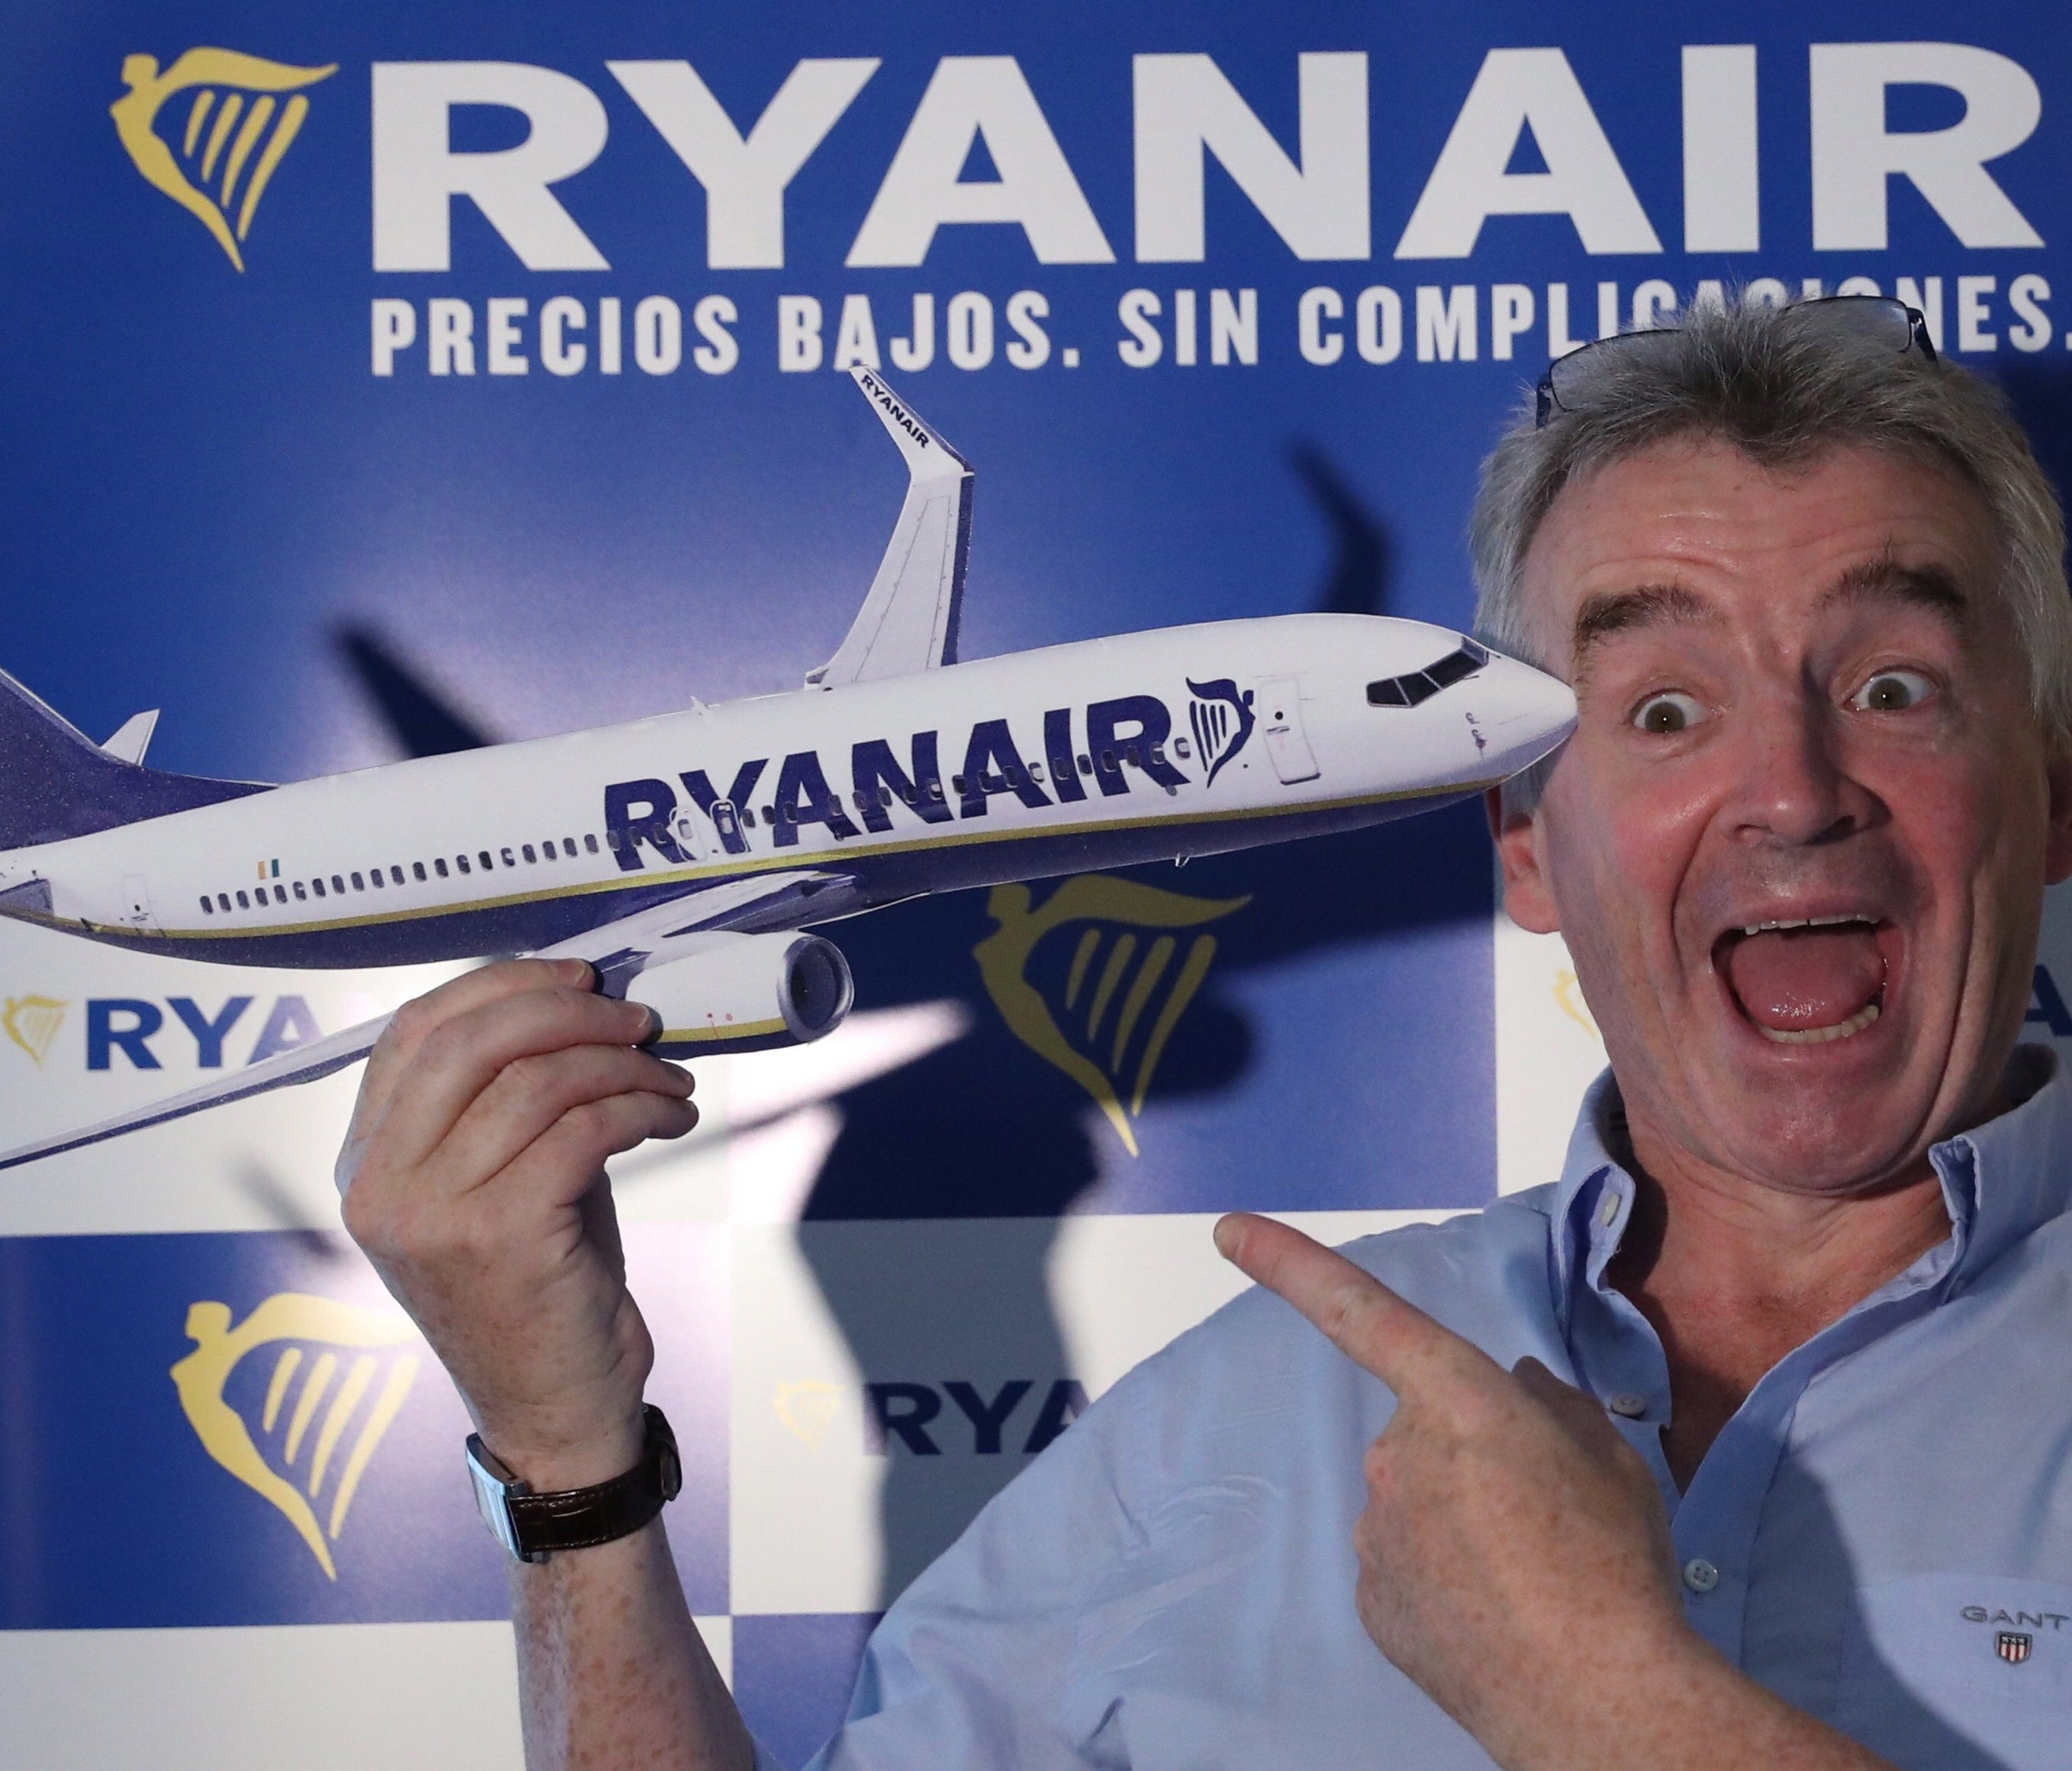 In this file photo from Aug. 24, 2017, Ryanair CEO Michael O'Leary addresses a press conference in Madrid.